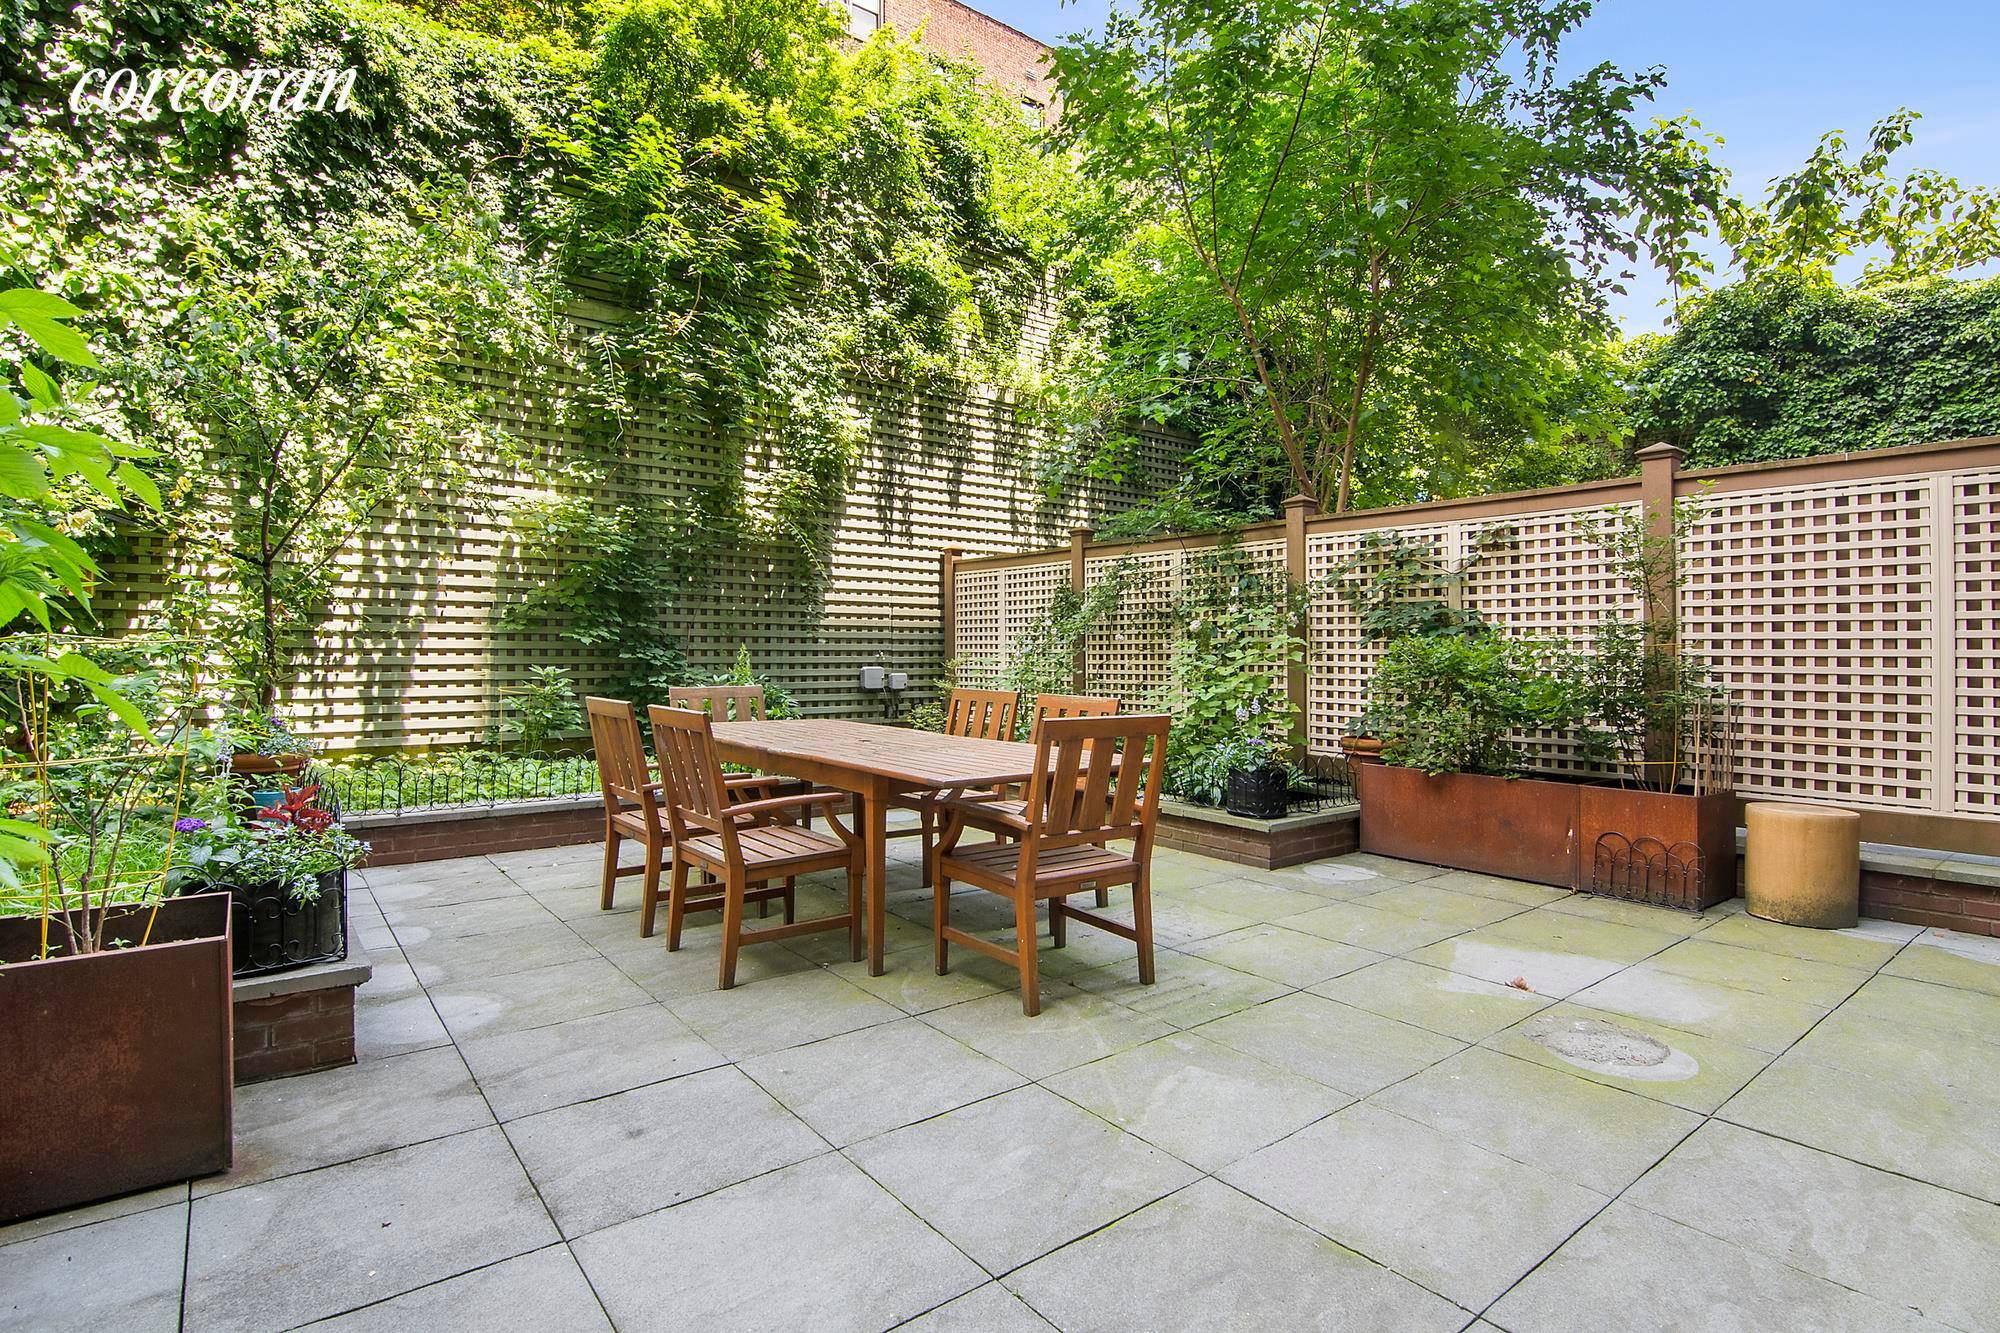 Enjoy the summer in your private 745sqft planted garden !